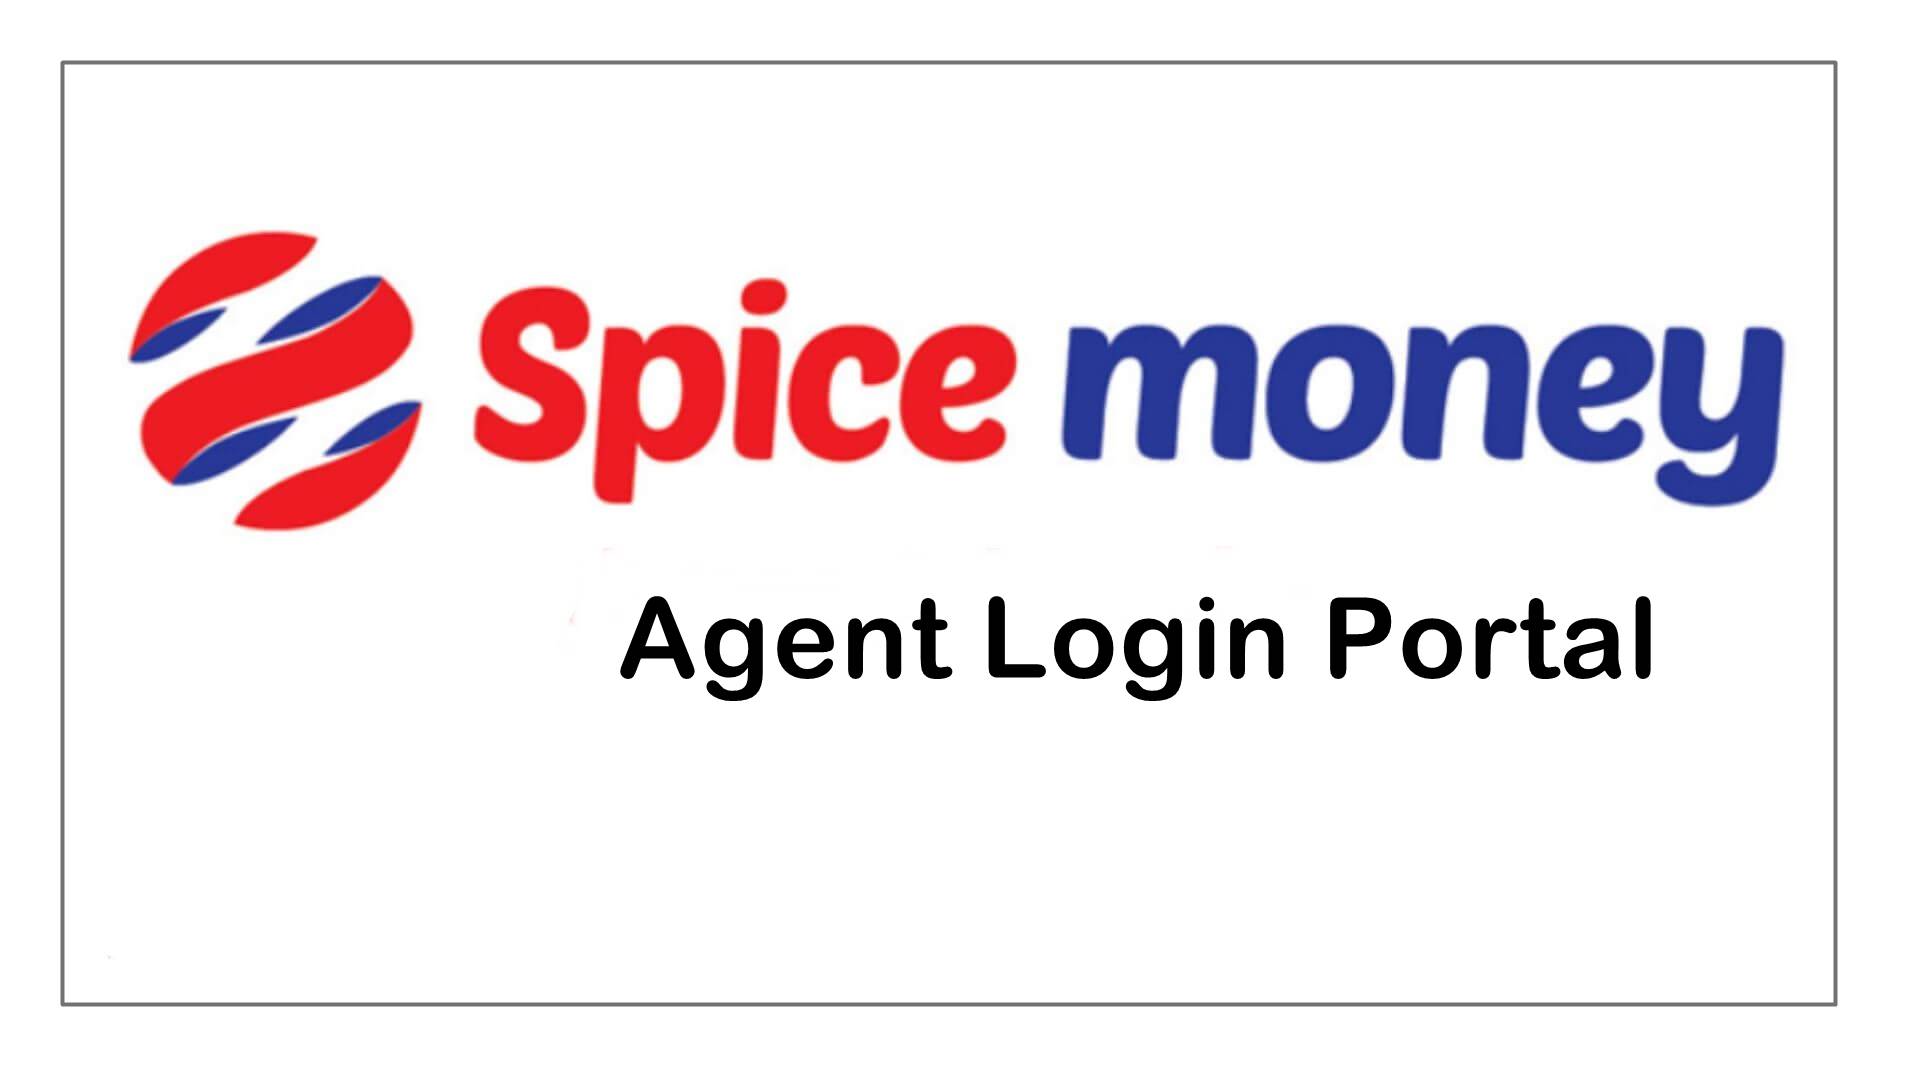 Spice Money Agent Login: How To Login To Spice Money Portal